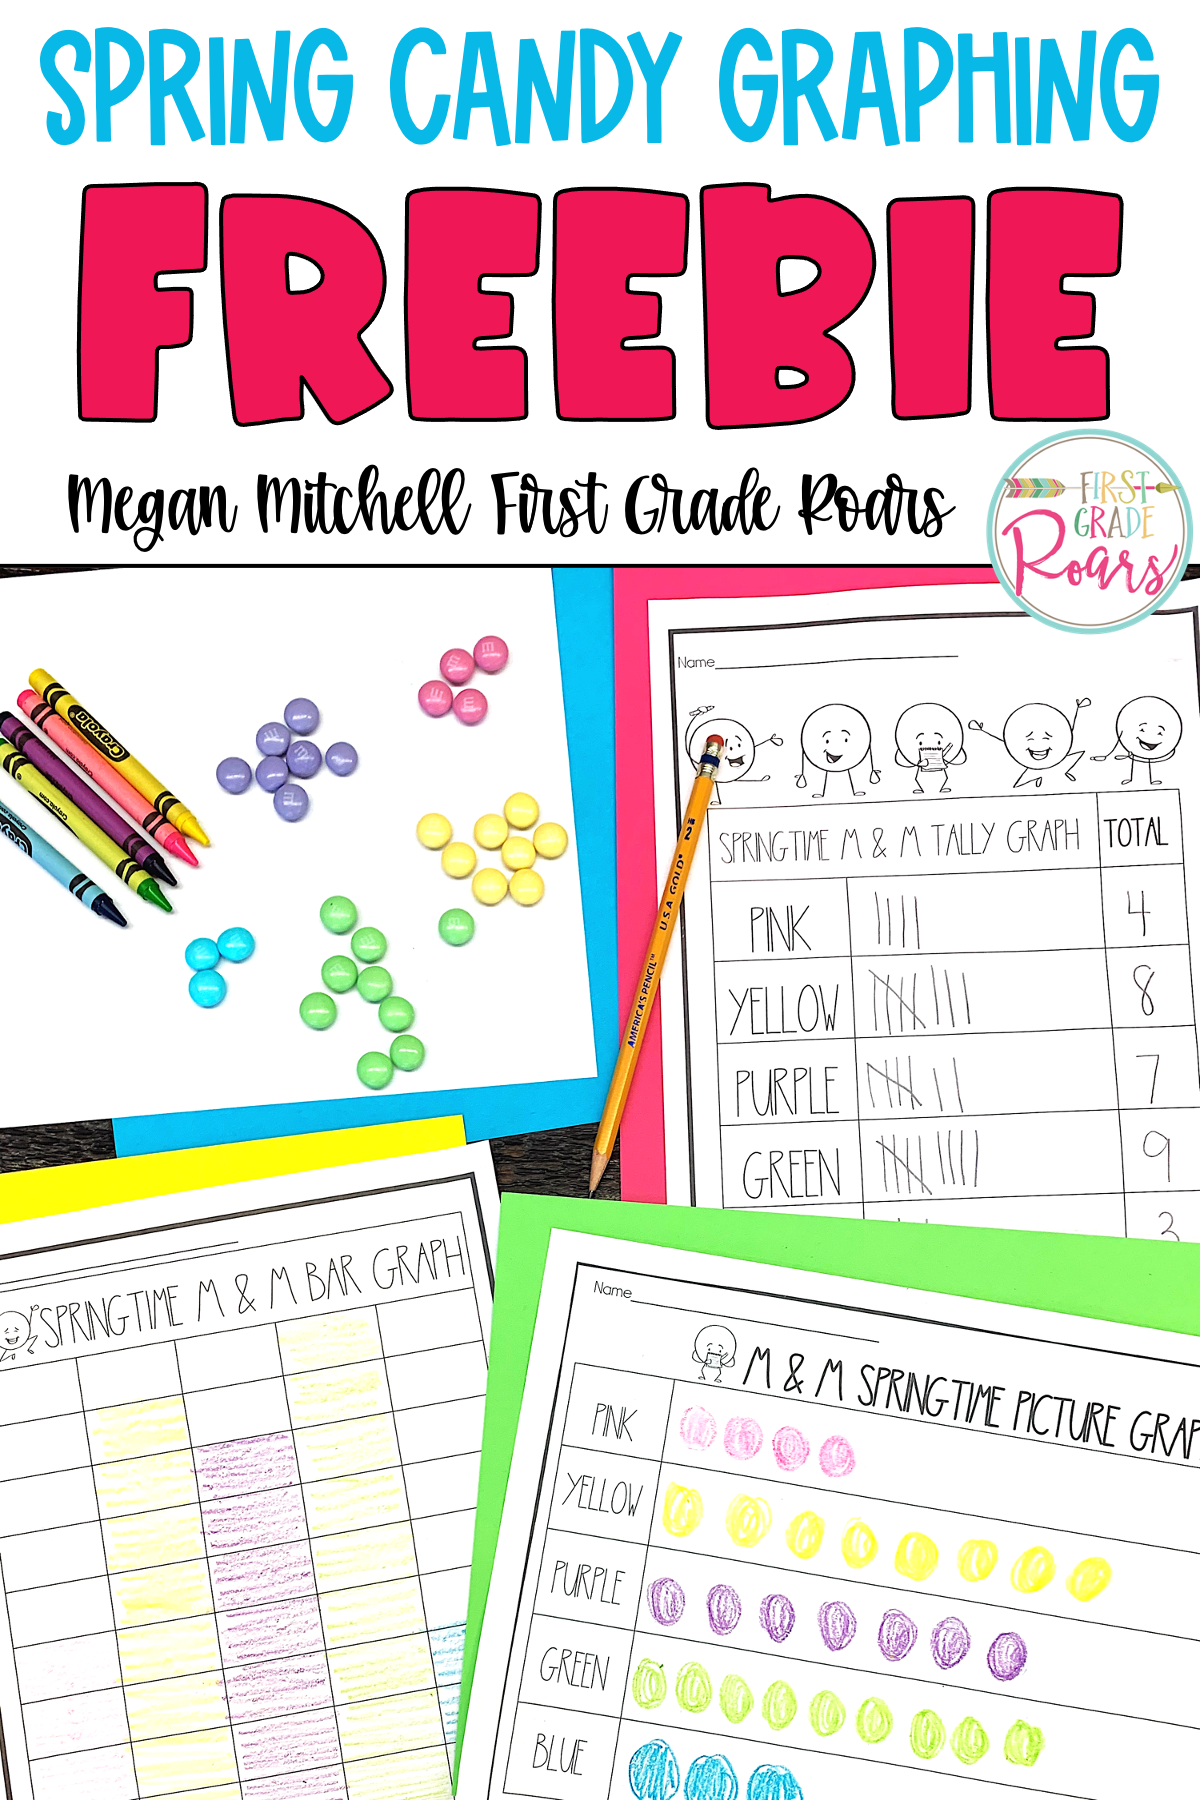 5 fun FREE Spring bunny, chick, and Peep activities. Lots of graphing fun with candy to enjoy as well. Certificates to reward positive achievements.